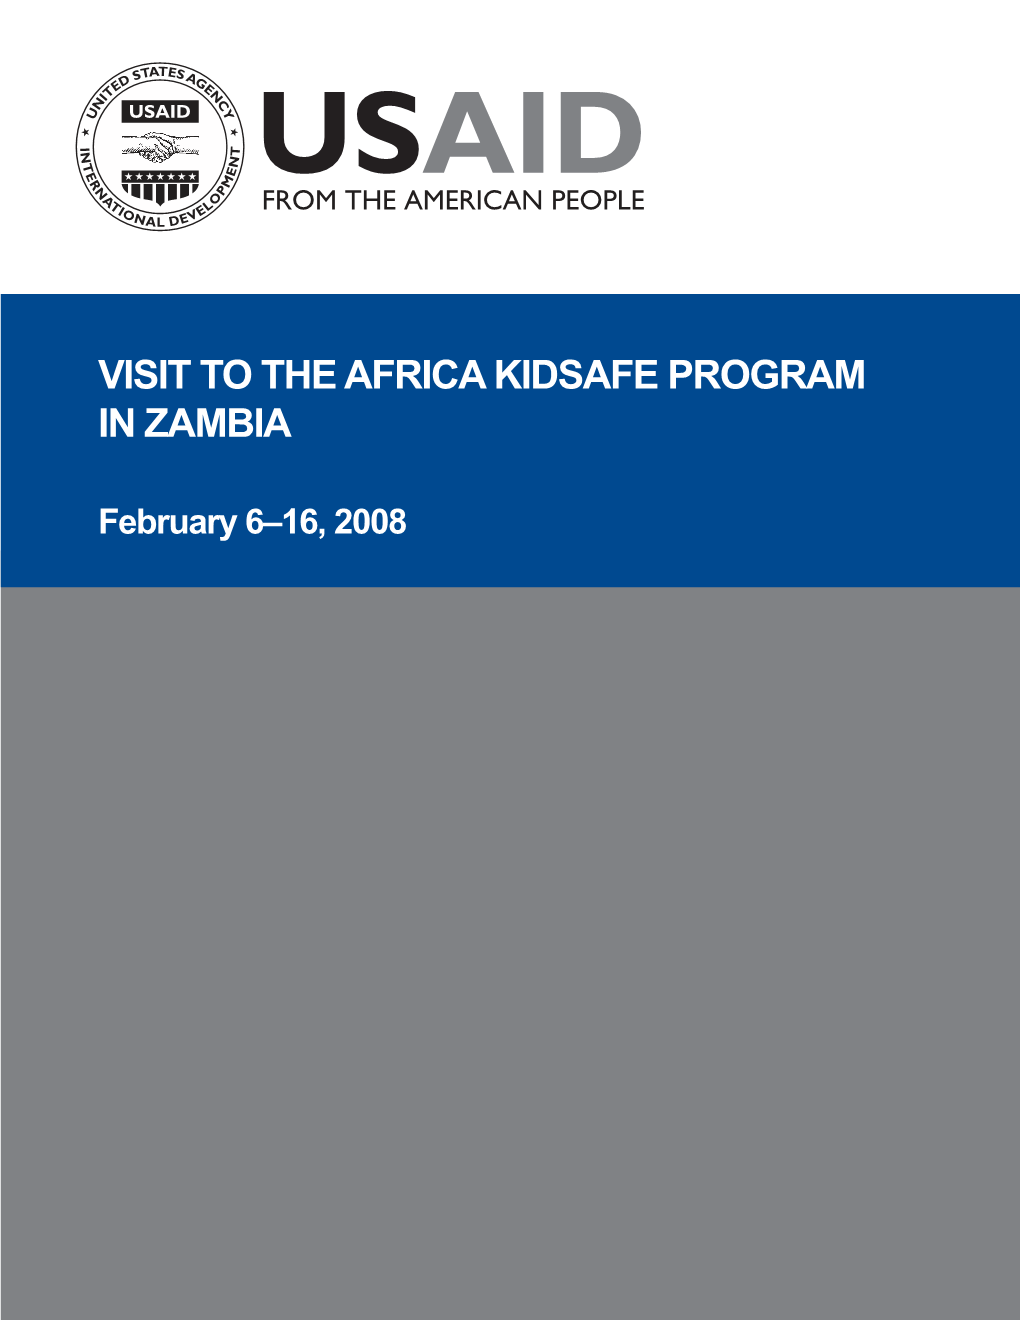 Visit to the Africa Kidsafe Program in Zambia